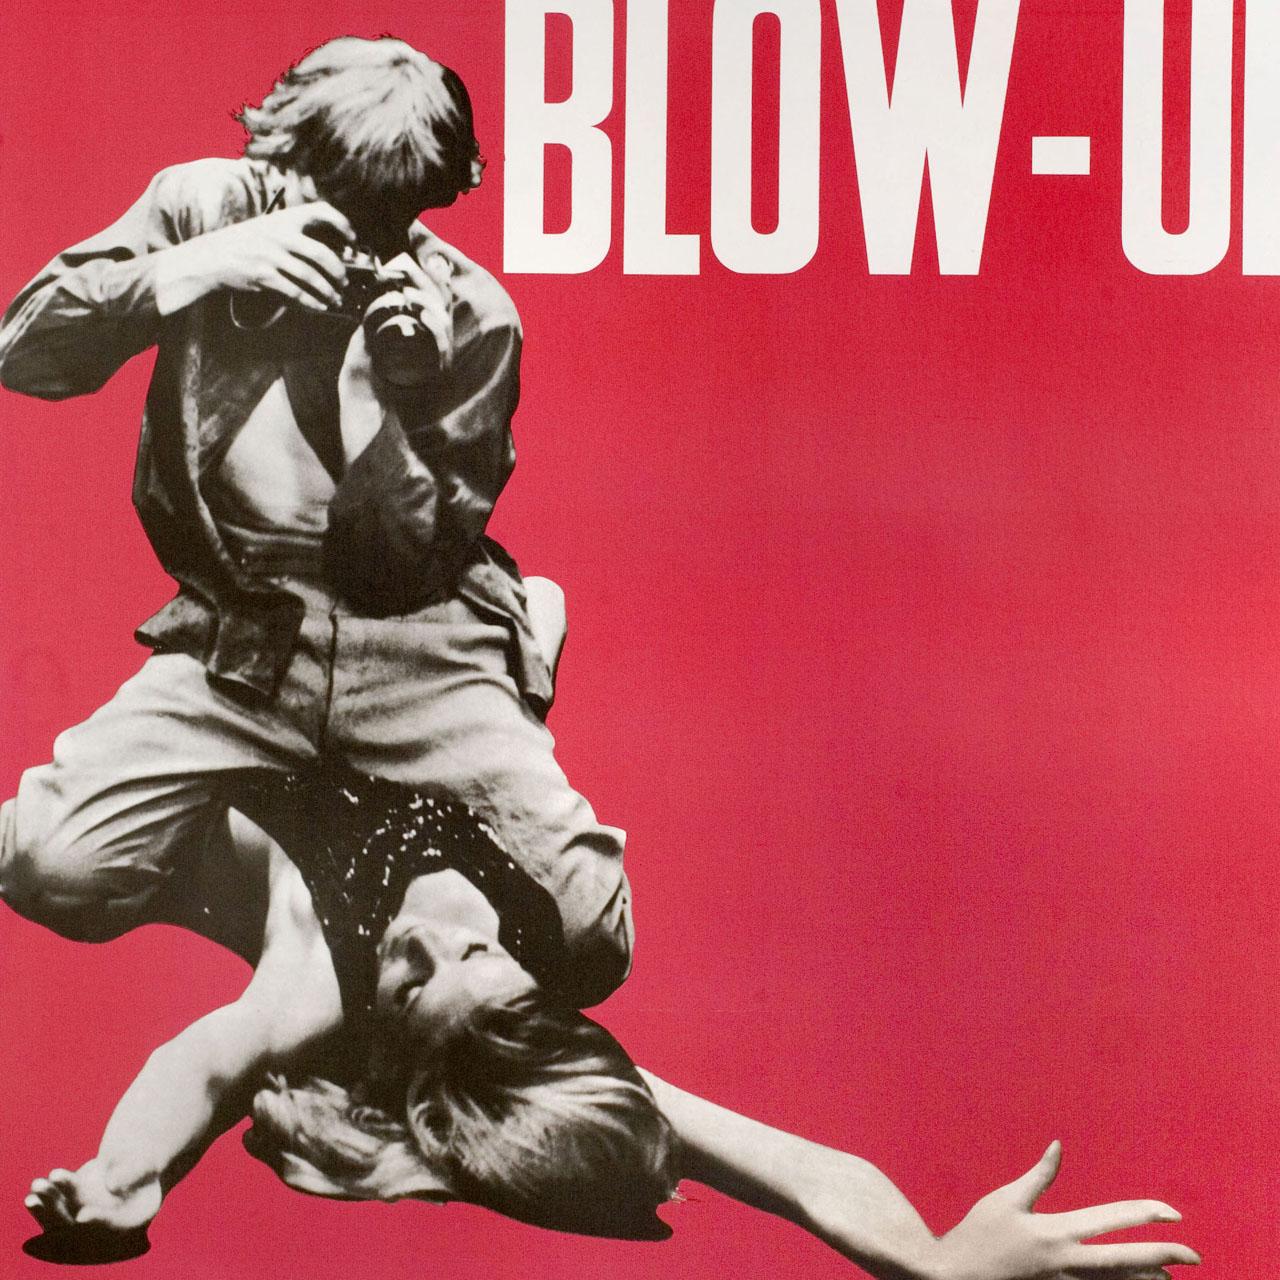 Original 1970s re-release Italian due fogli poster for the 1966 film “Blow-Up” (Blow Up) directed by Michelangelo Antonioni with Vanessa Redgrave and Sarah Miles. Fine condition, linen-backed. This poster has been professionally linen-backed. Please